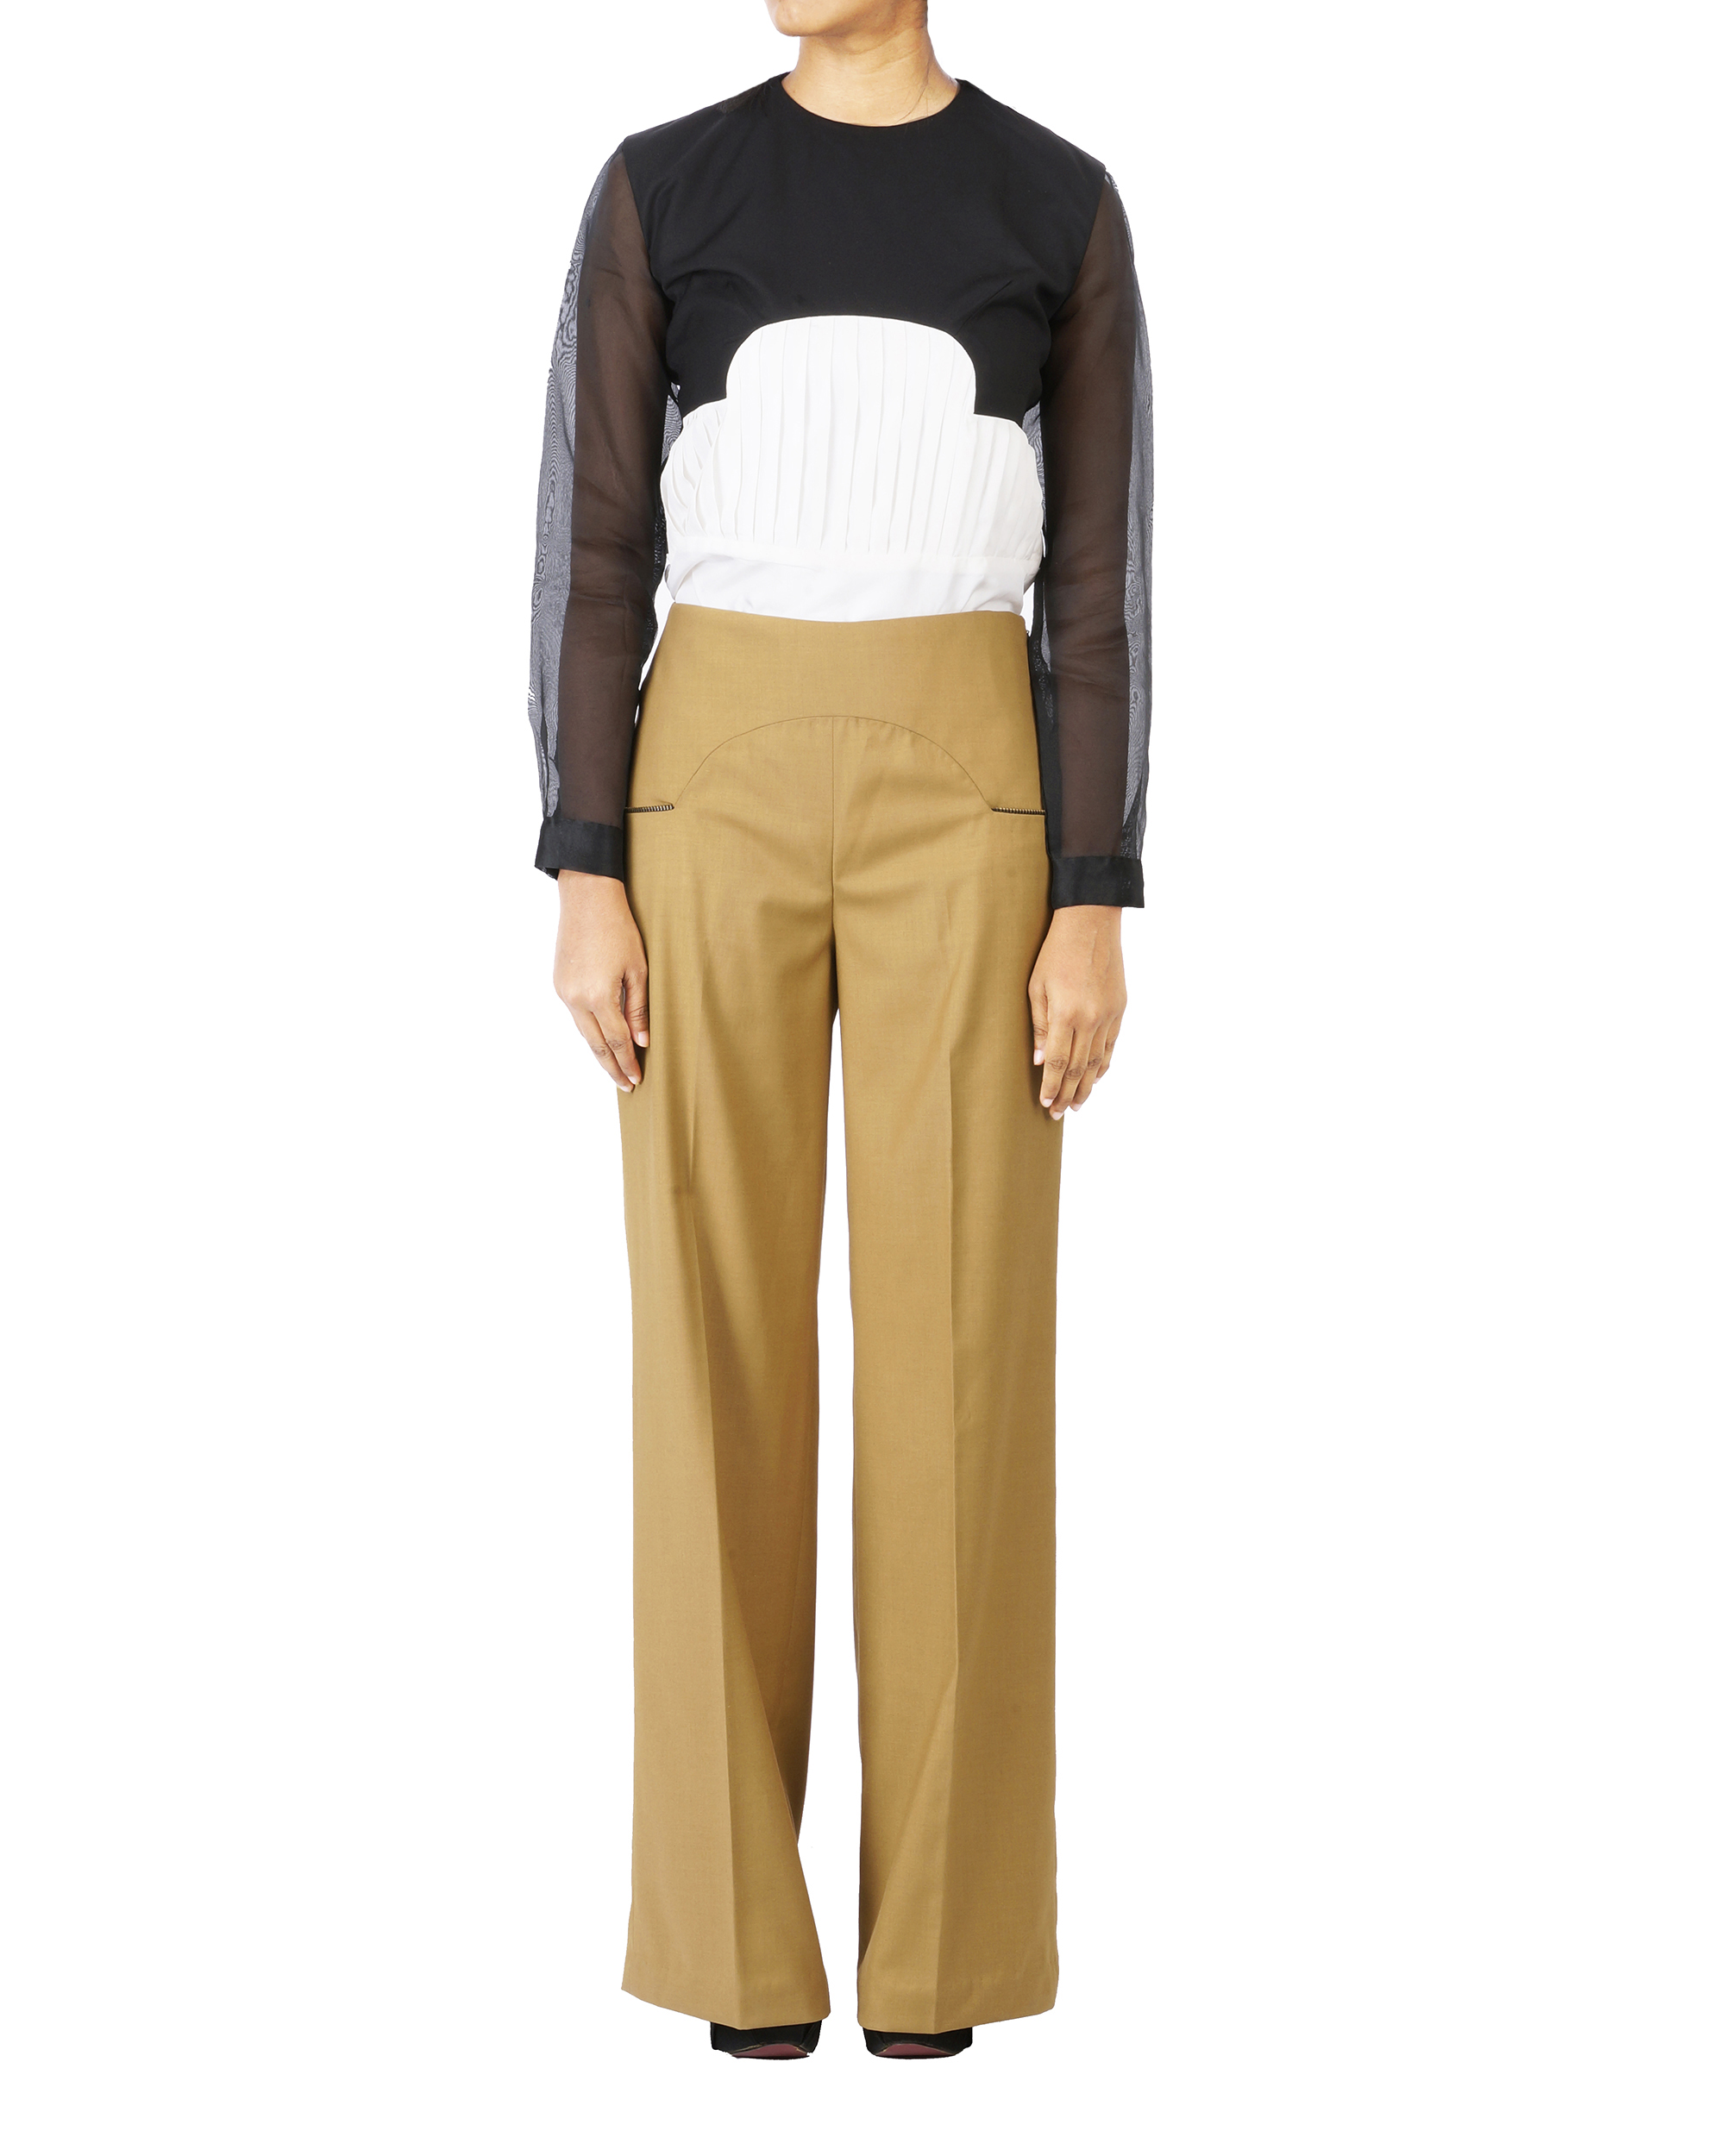 Crossing lines high-waist pants by Six Buttons Down | The Secret Label